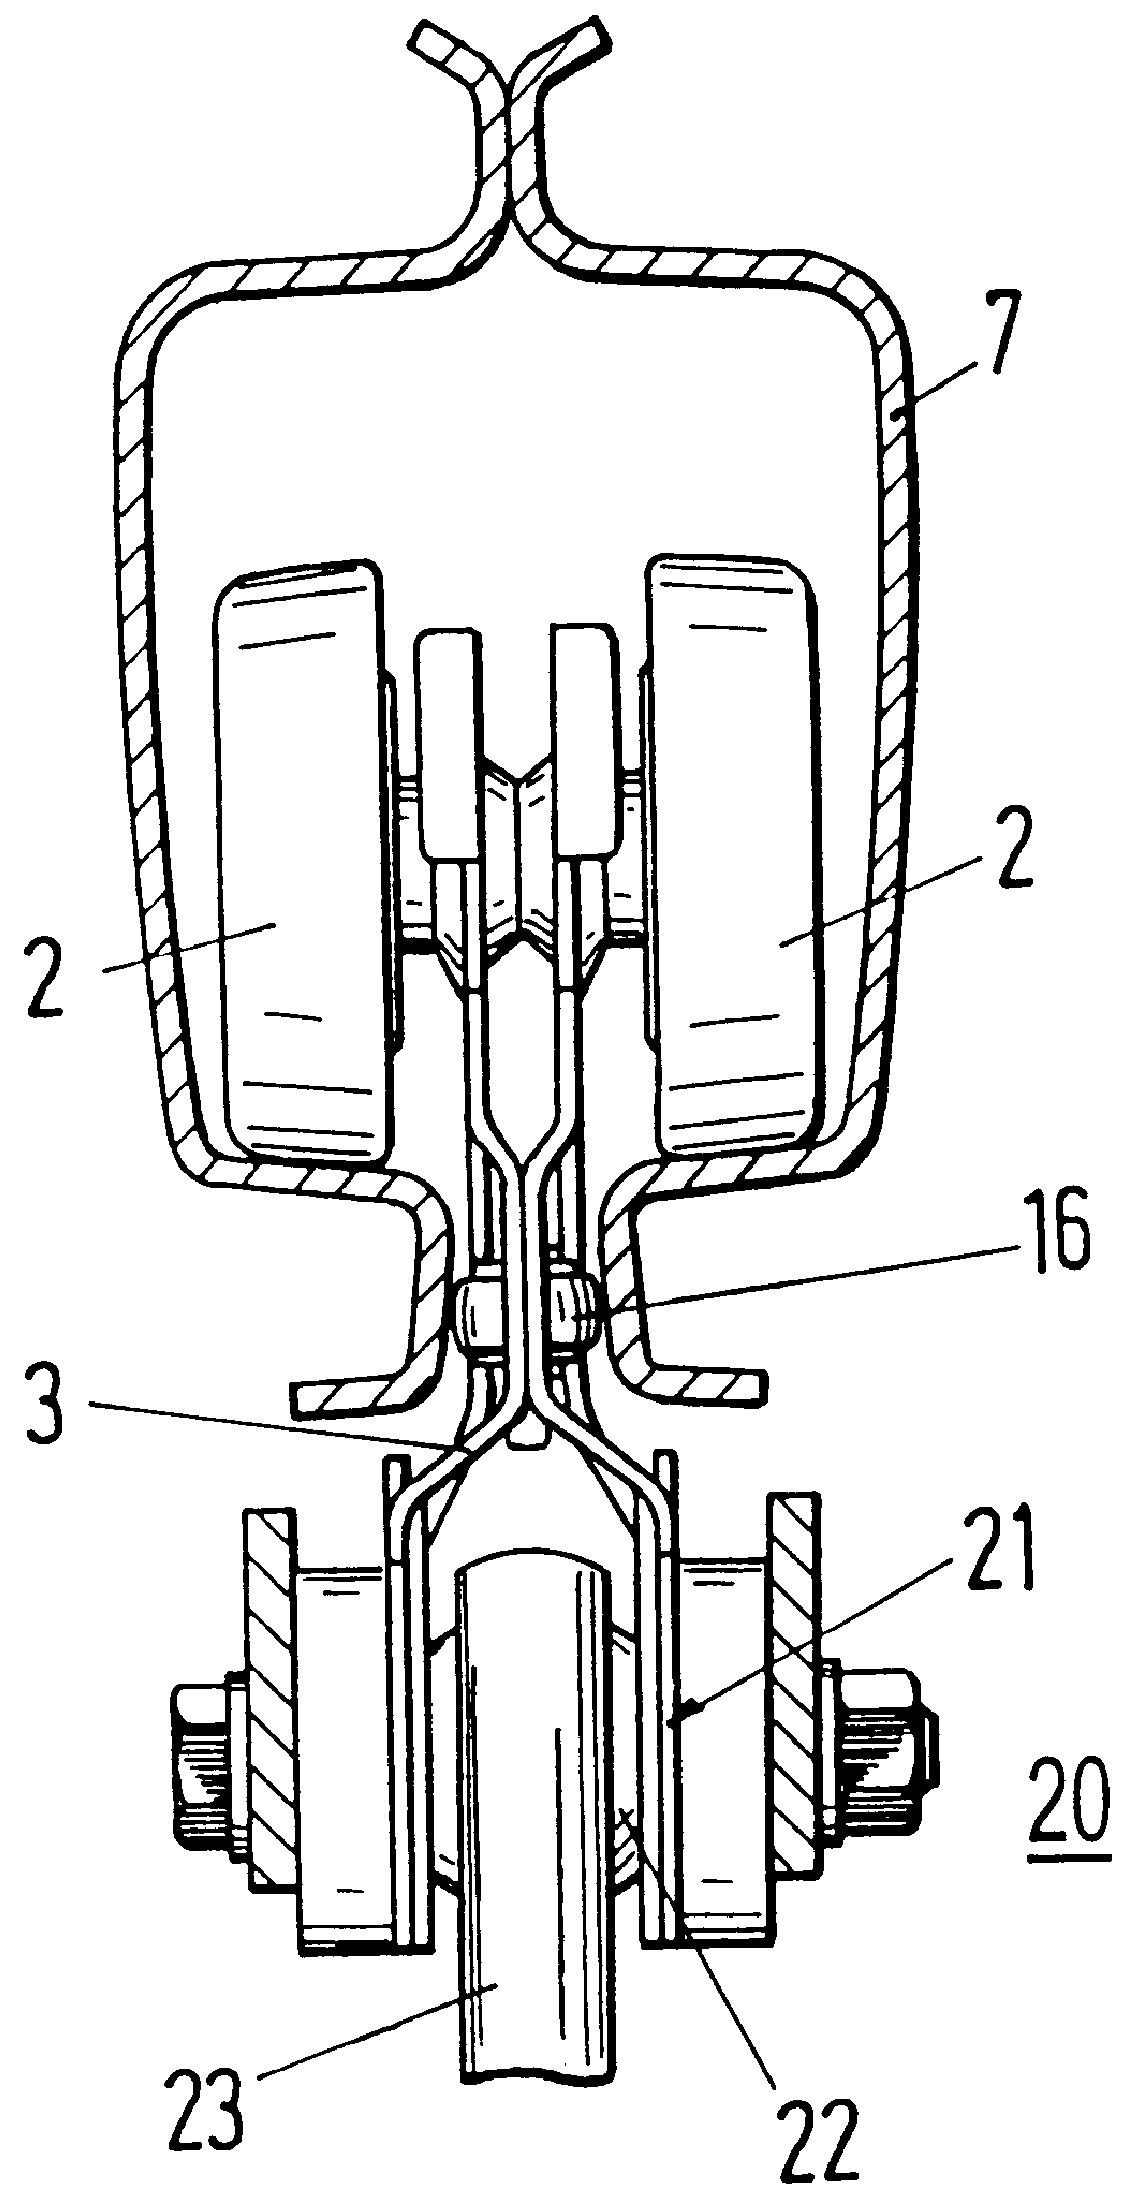 Traveling mechanism in a lifting arrangement which is moveable on rails